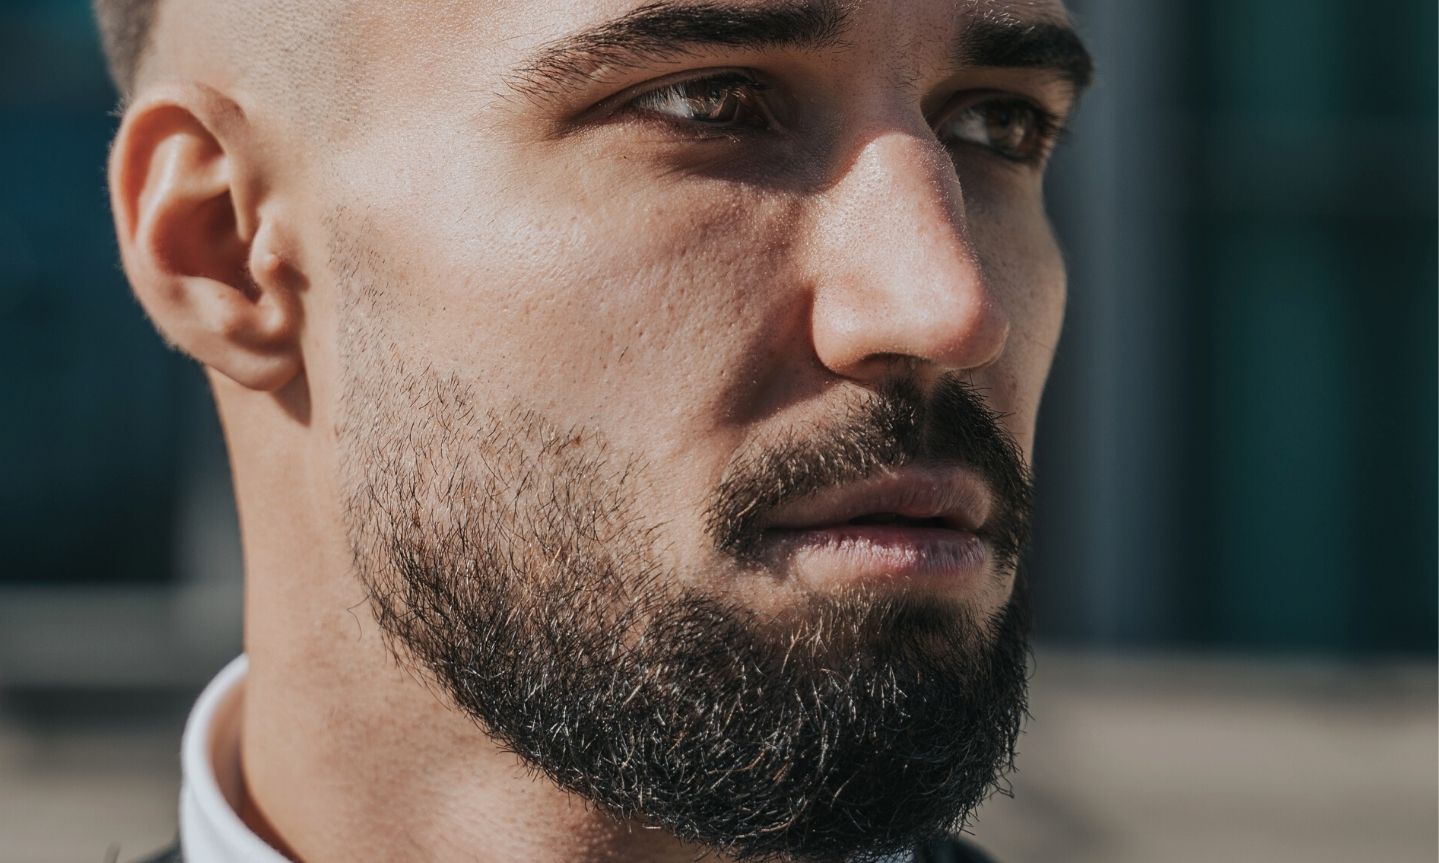 13 Short Beard Styles to Grow at Least Once - The Rugged Bros